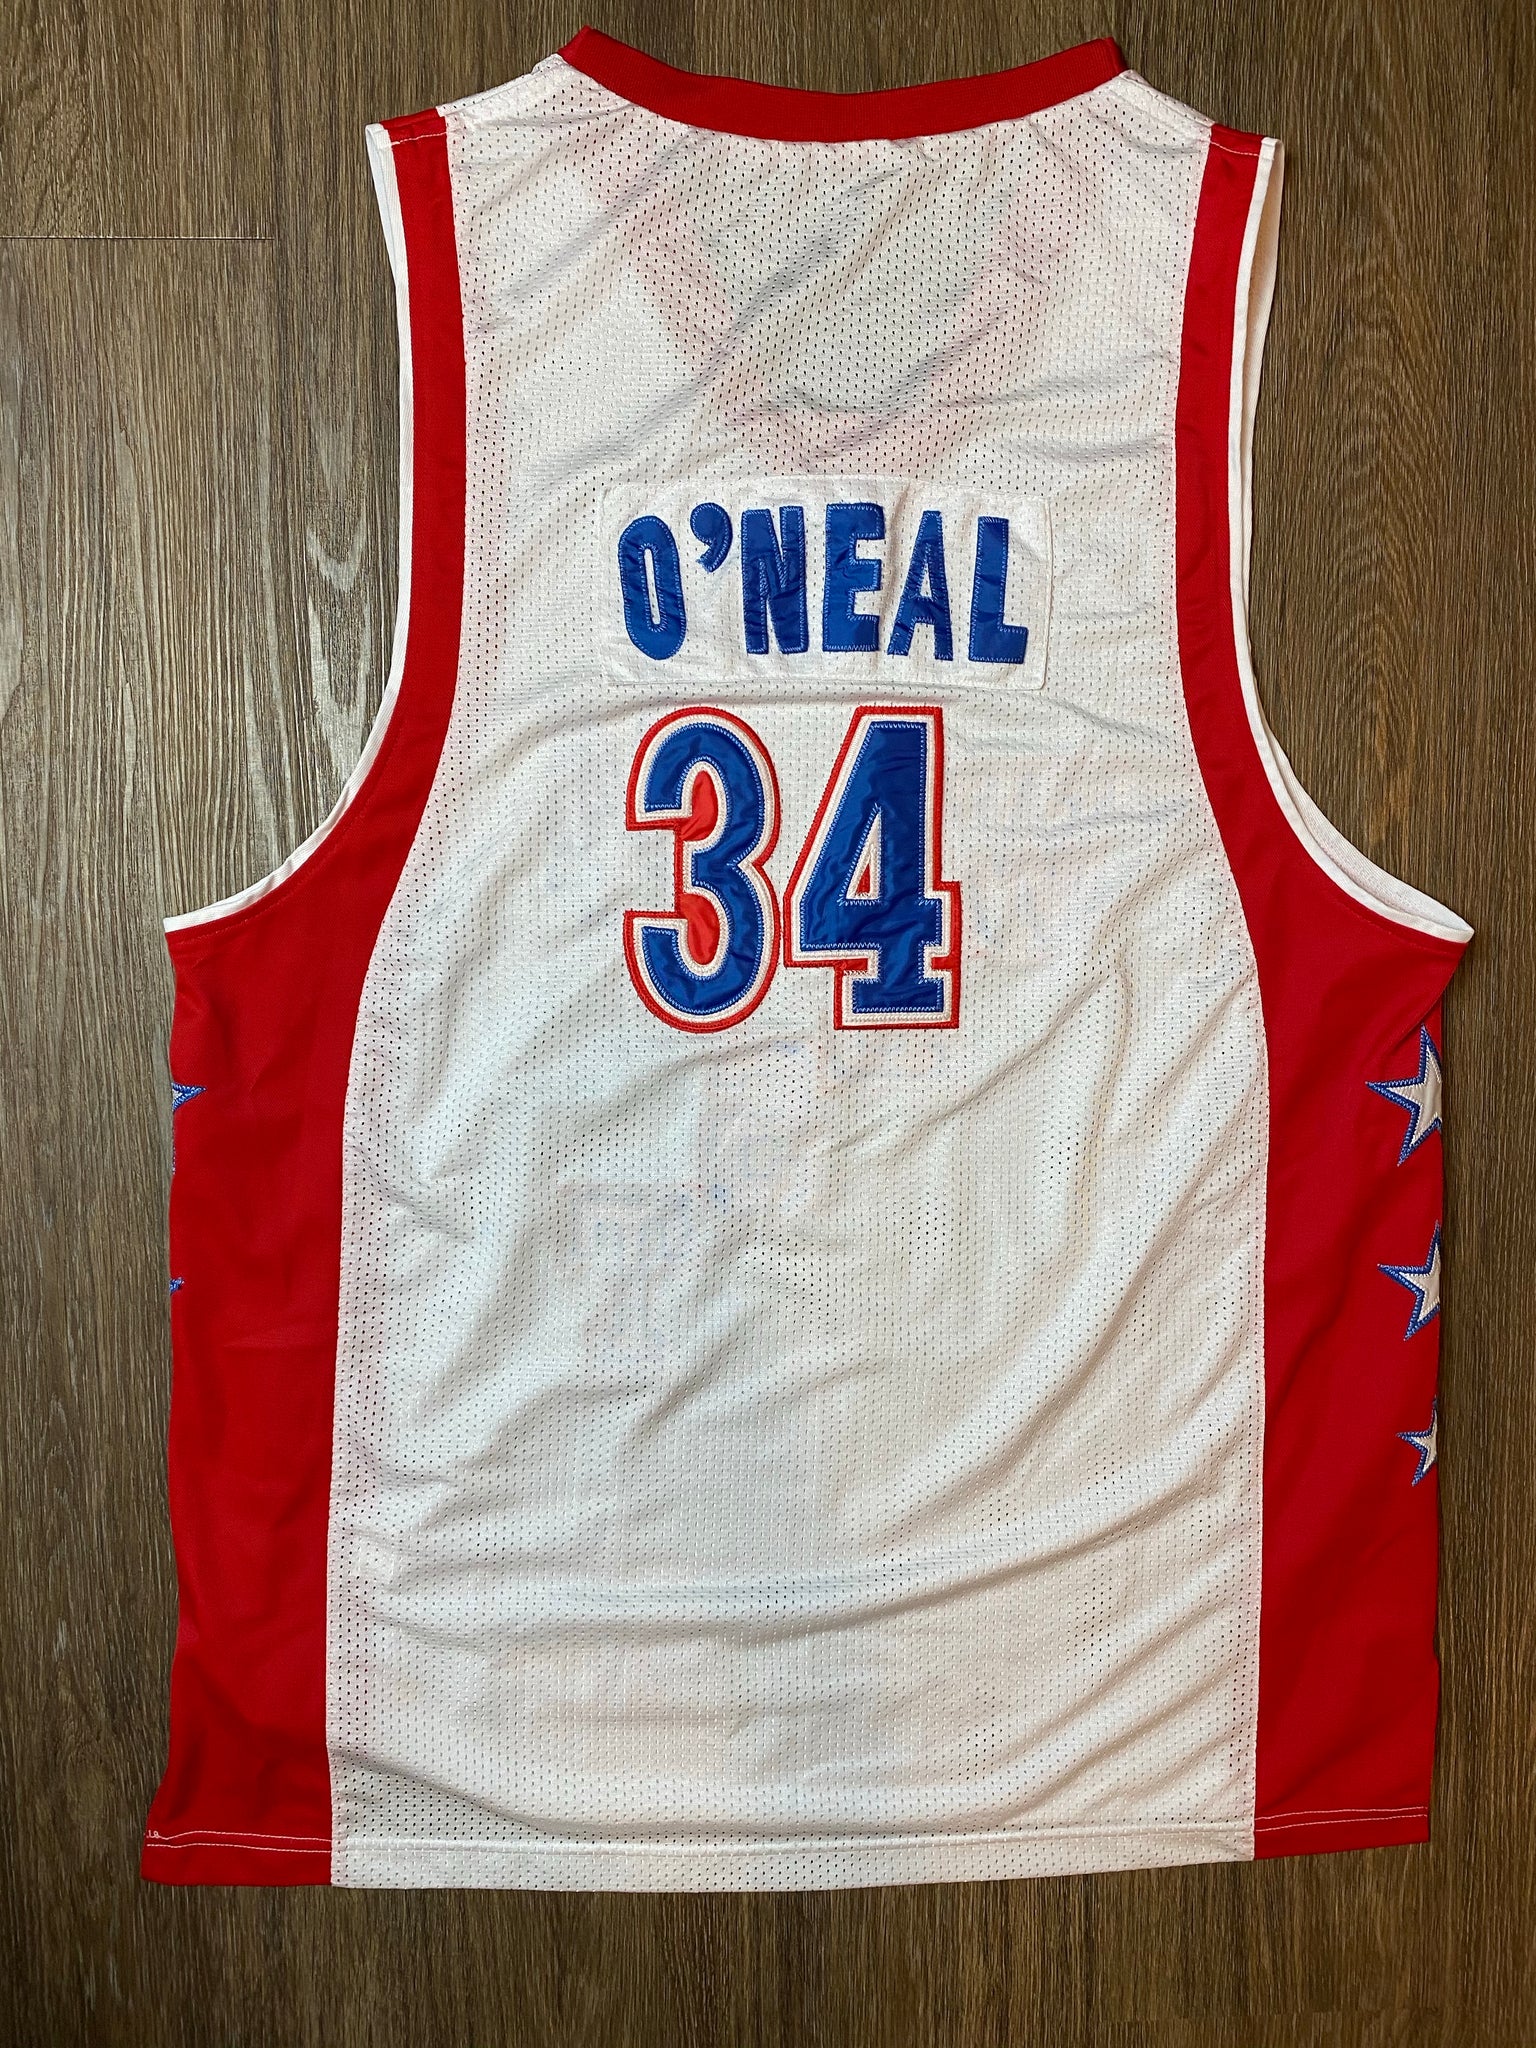 All Star Shaquille O’Neal 34 Jersey